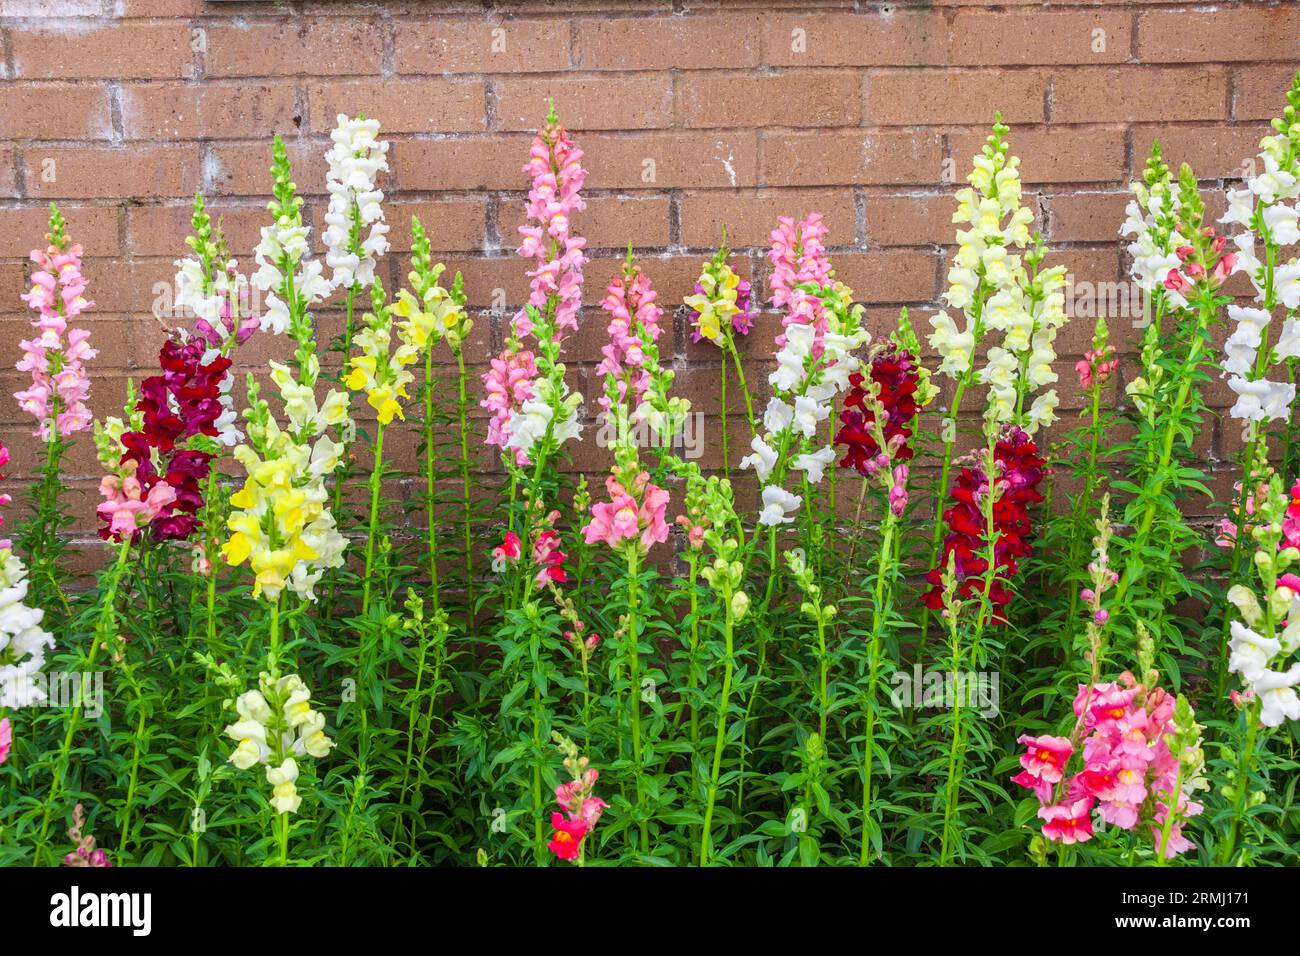 Snapdragons, Antirrhinum majus 'Rocket Mix', in the Sibley Horticultural Center at Callaway Gardens in Pine Mountain, Georgia. Stock Photo